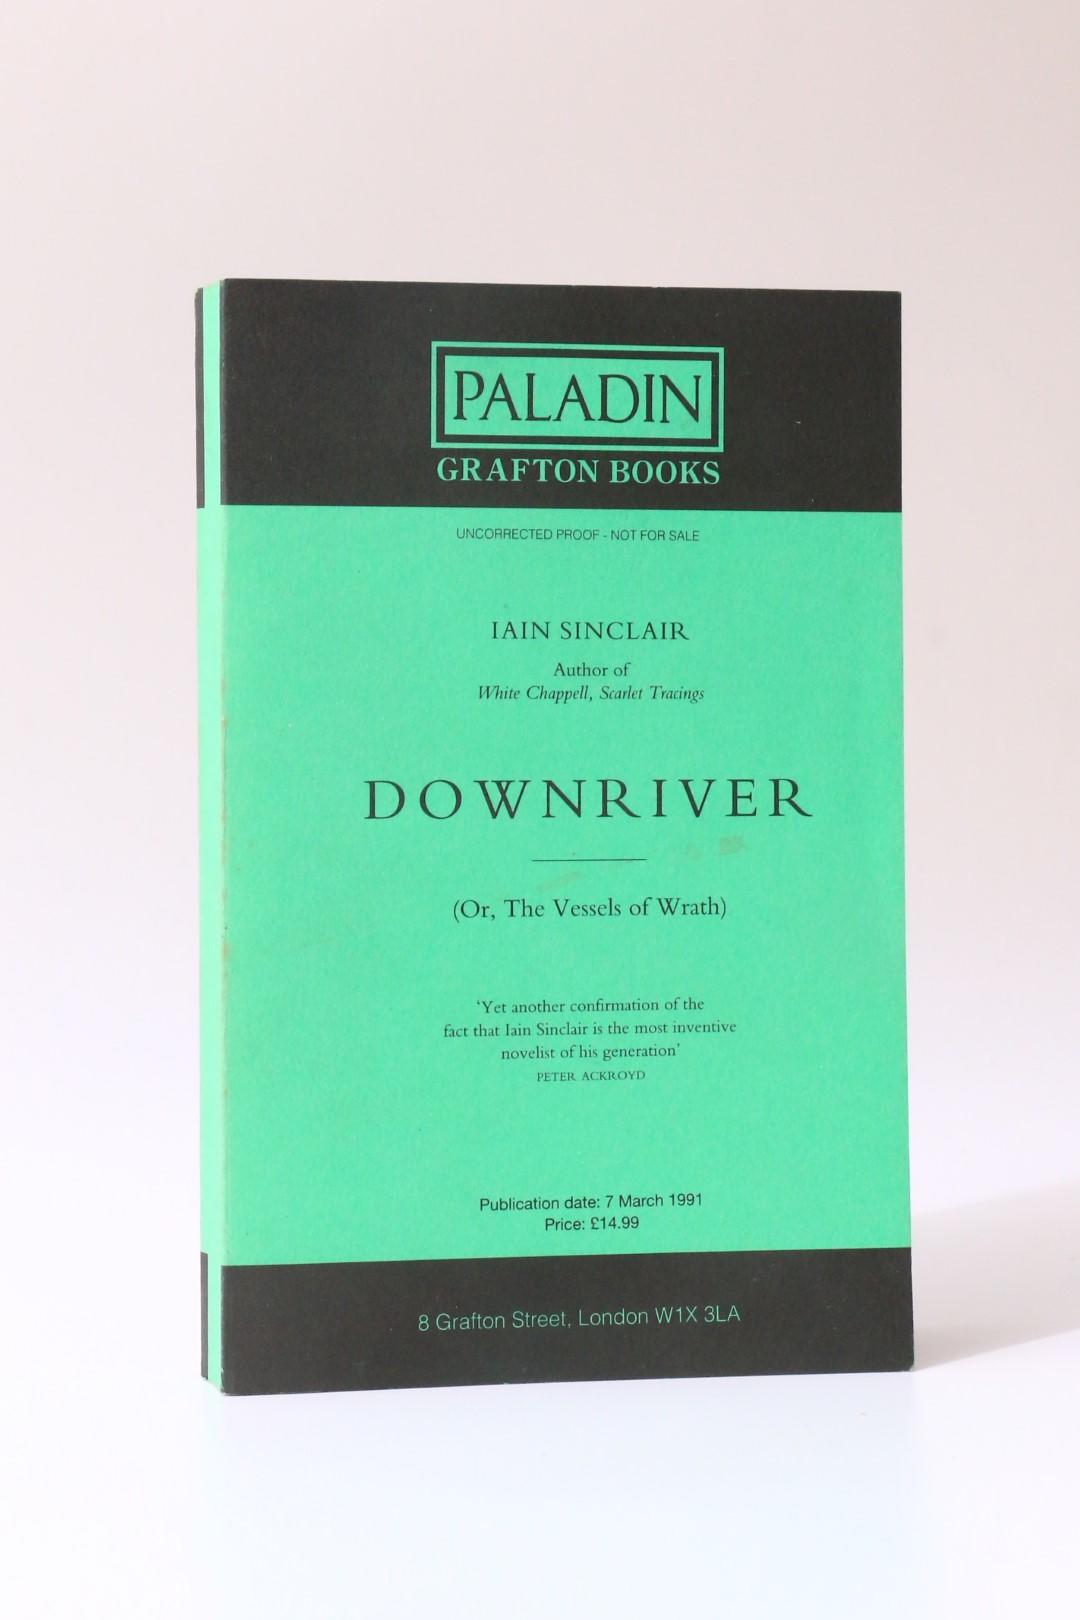 Iain Sinclair - Downriver (Or, The Vessels of Wrath) - Grafton, 1991, Proof. Signed